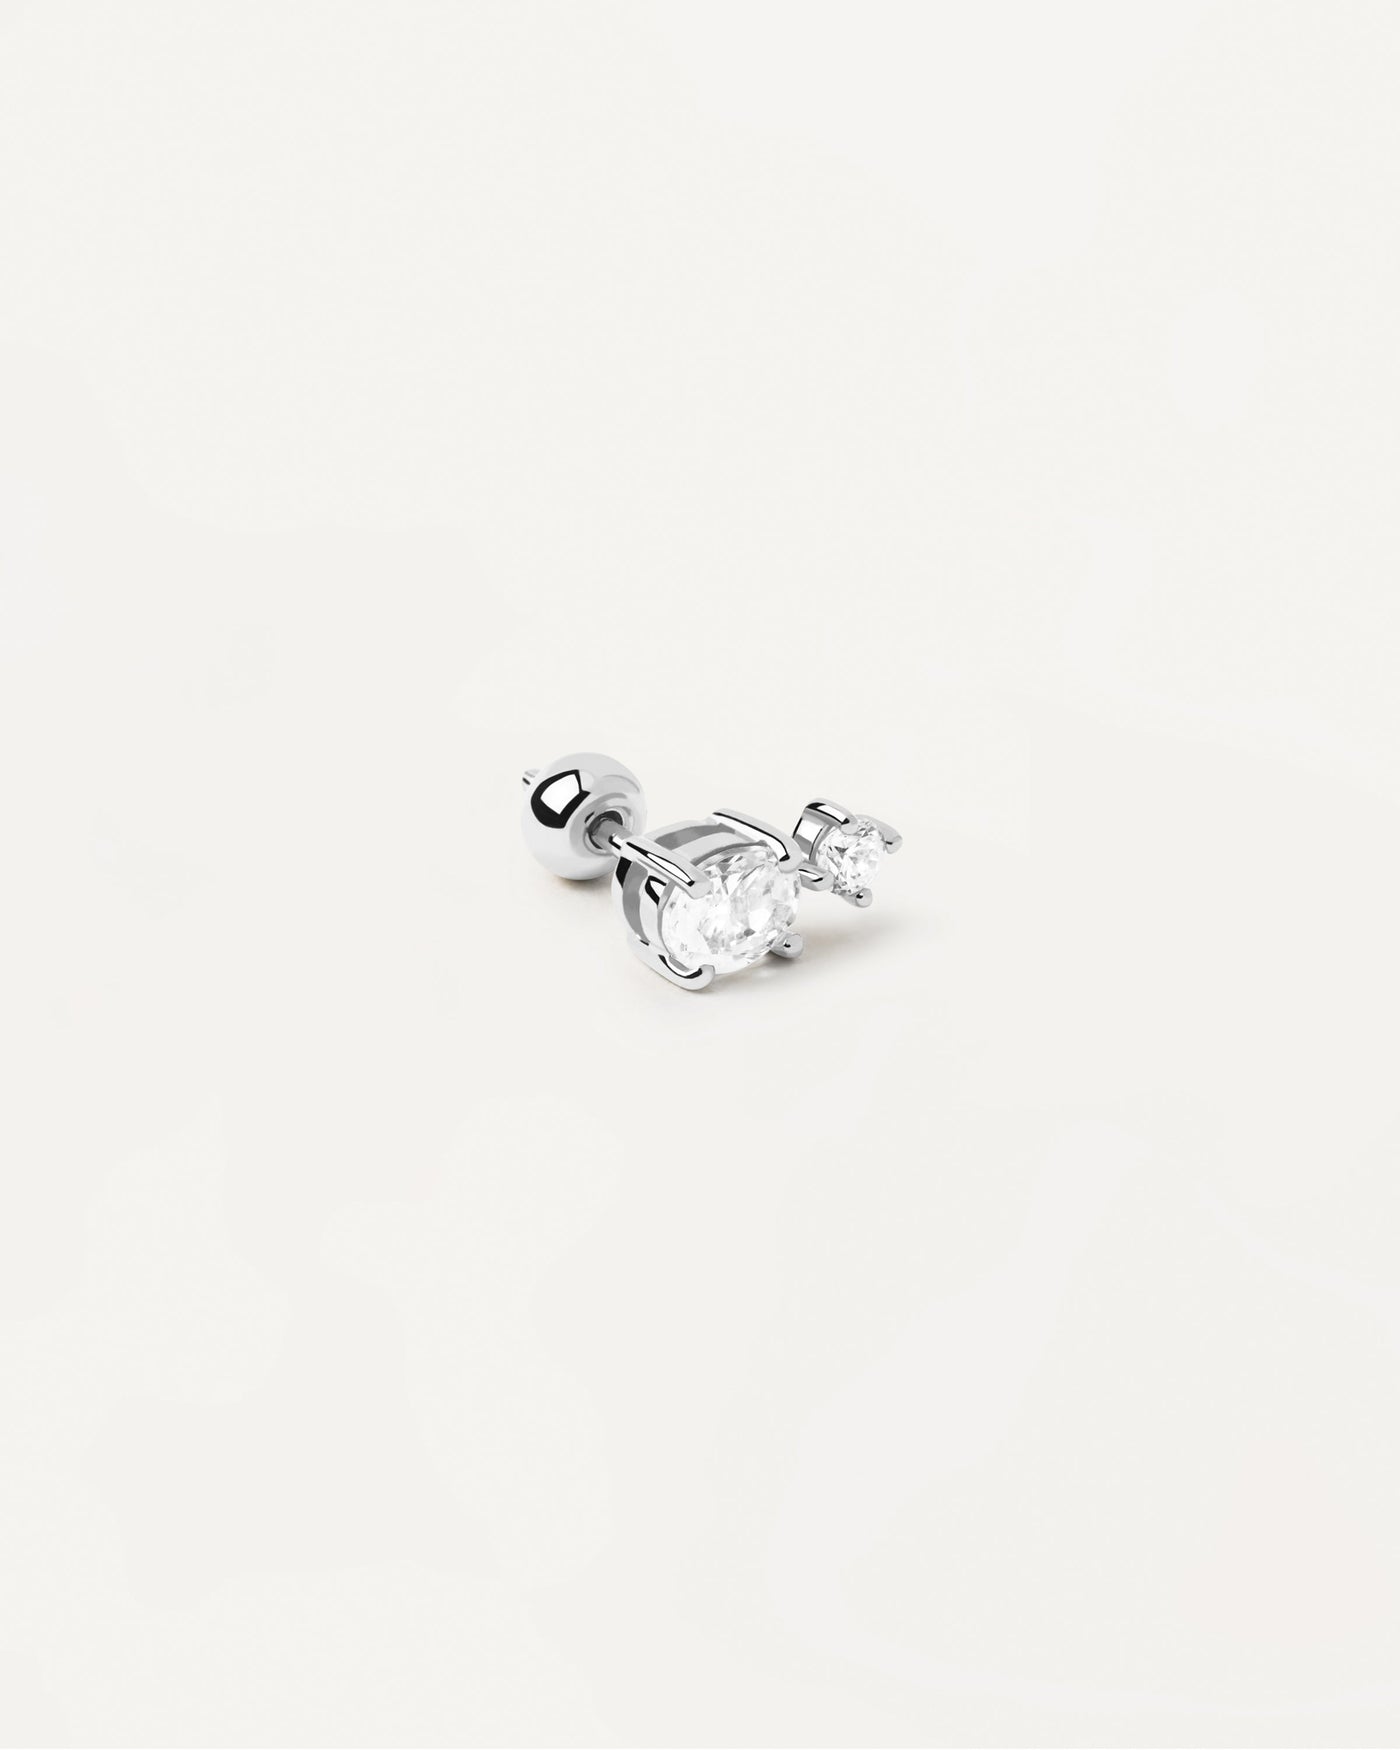 2023 Selection | Nikita Single Silver Earring. 2 white zirconia ear piercing in sterling silver. Get the latest arrival from PDPAOLA. Place your order safely and get this Best Seller. Free Shipping.